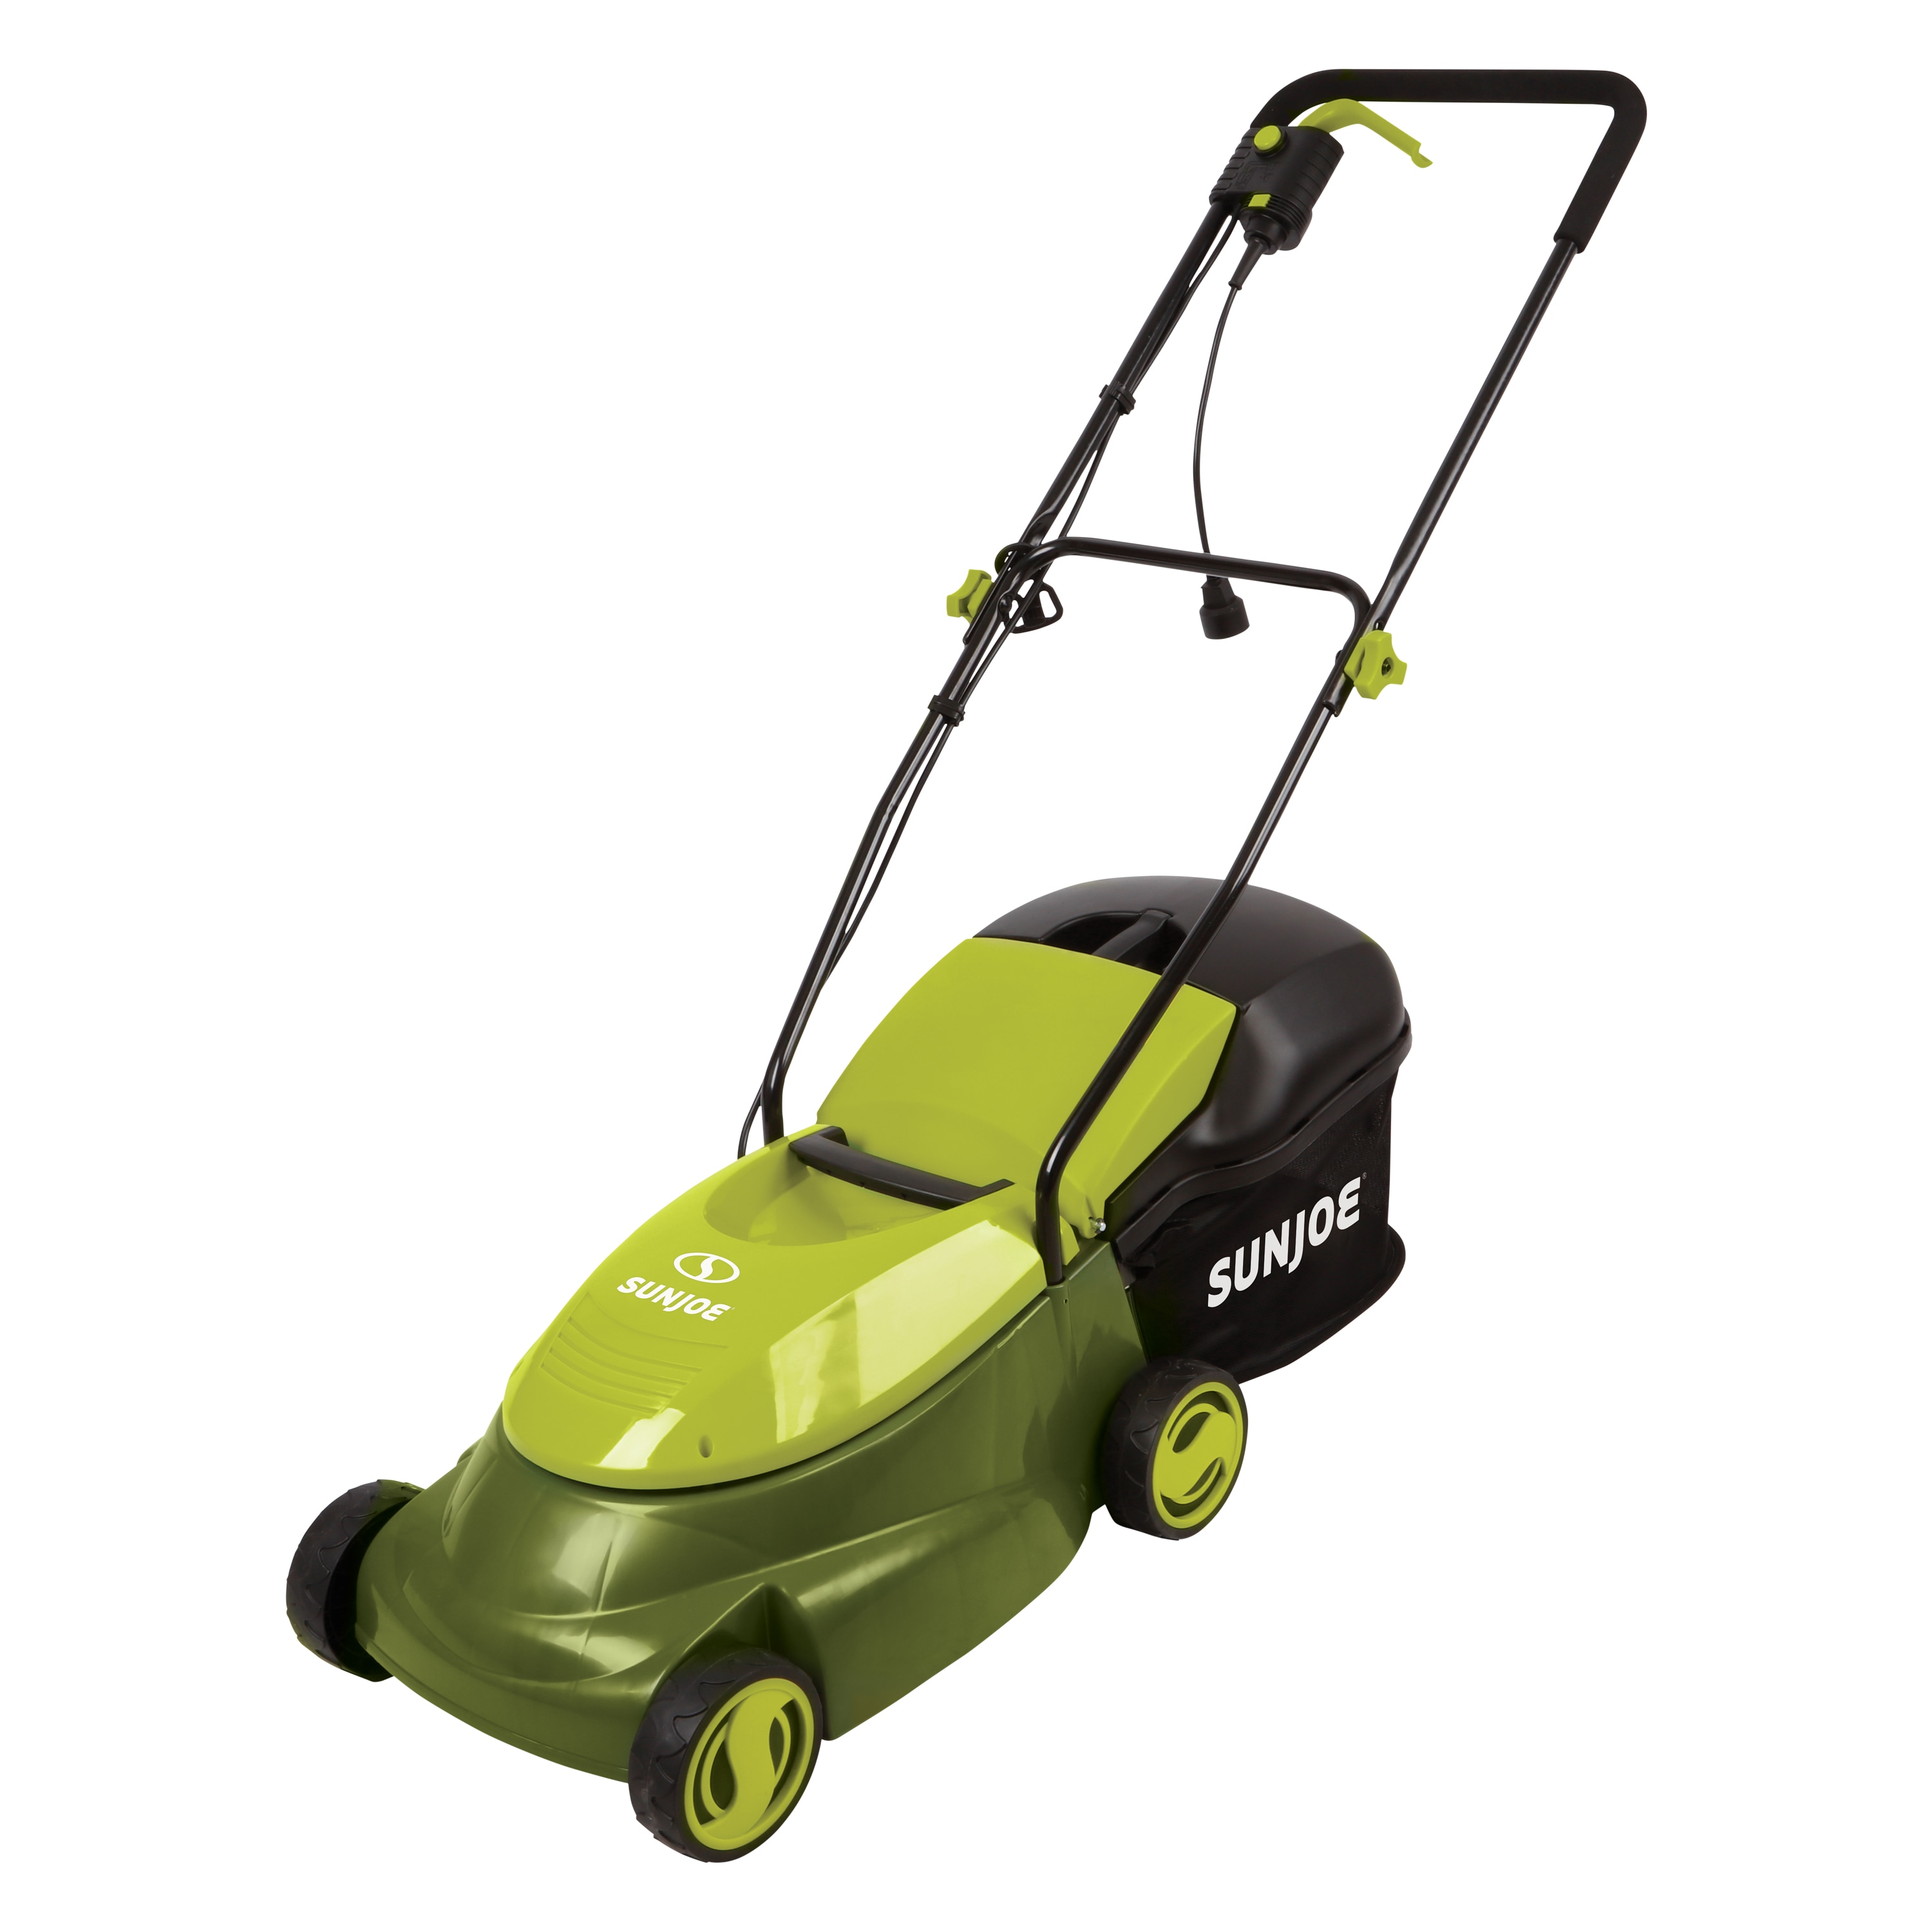 15 in. 10 AMP Corded Electric Walk Behind Push Lawn Mower